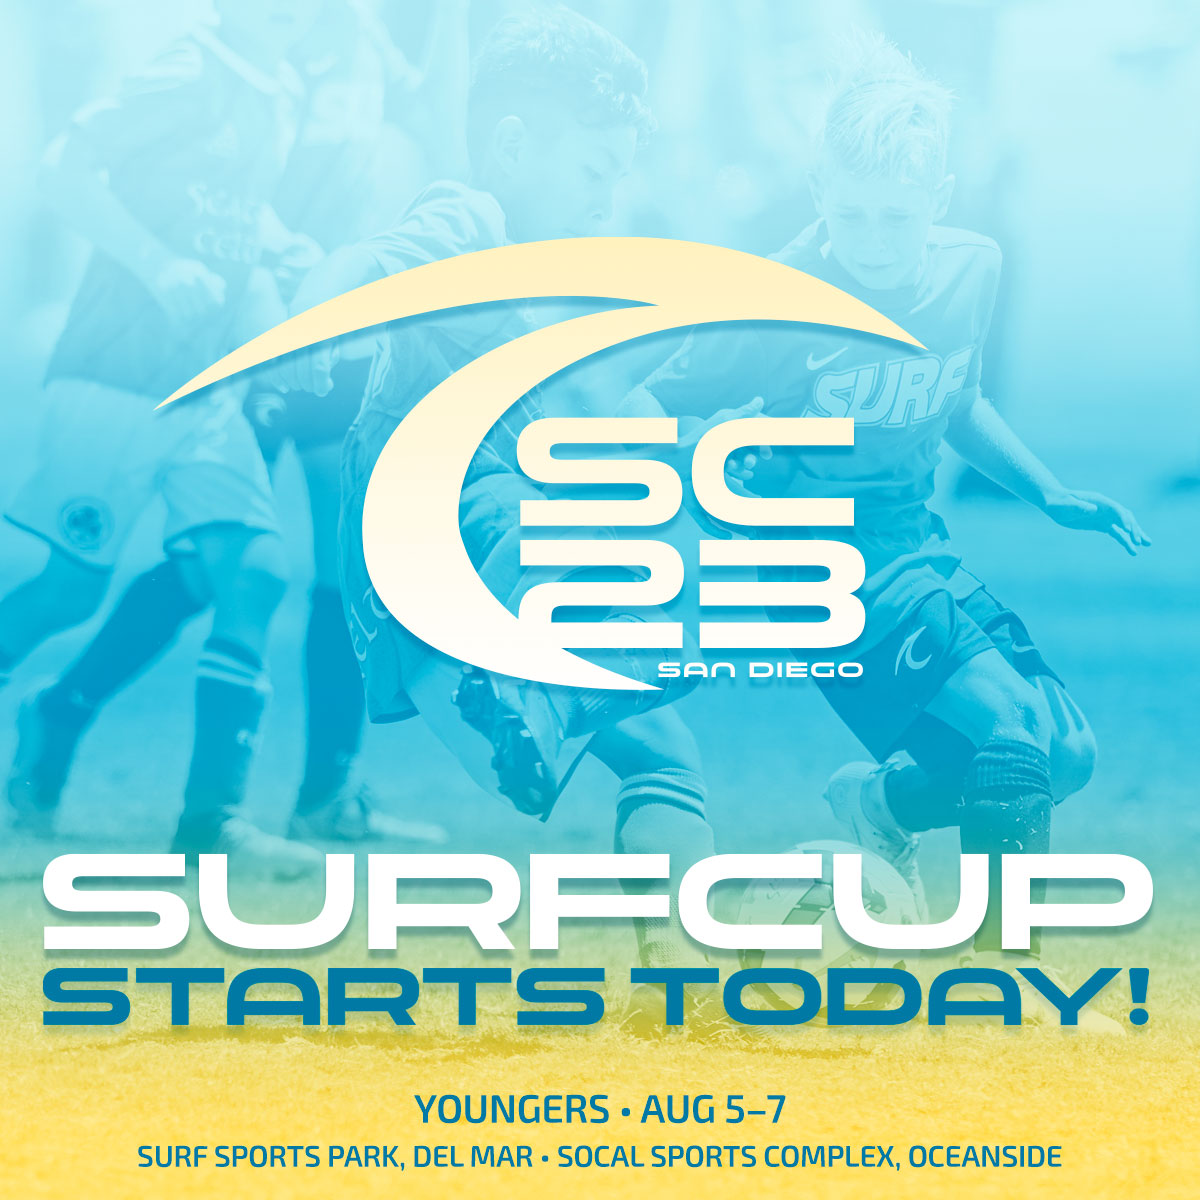 Welcome to THE CUP. #SurfCup YOUNGERS is officially underway! Good luck to all teams playing this weekend! #BestOfTheBest